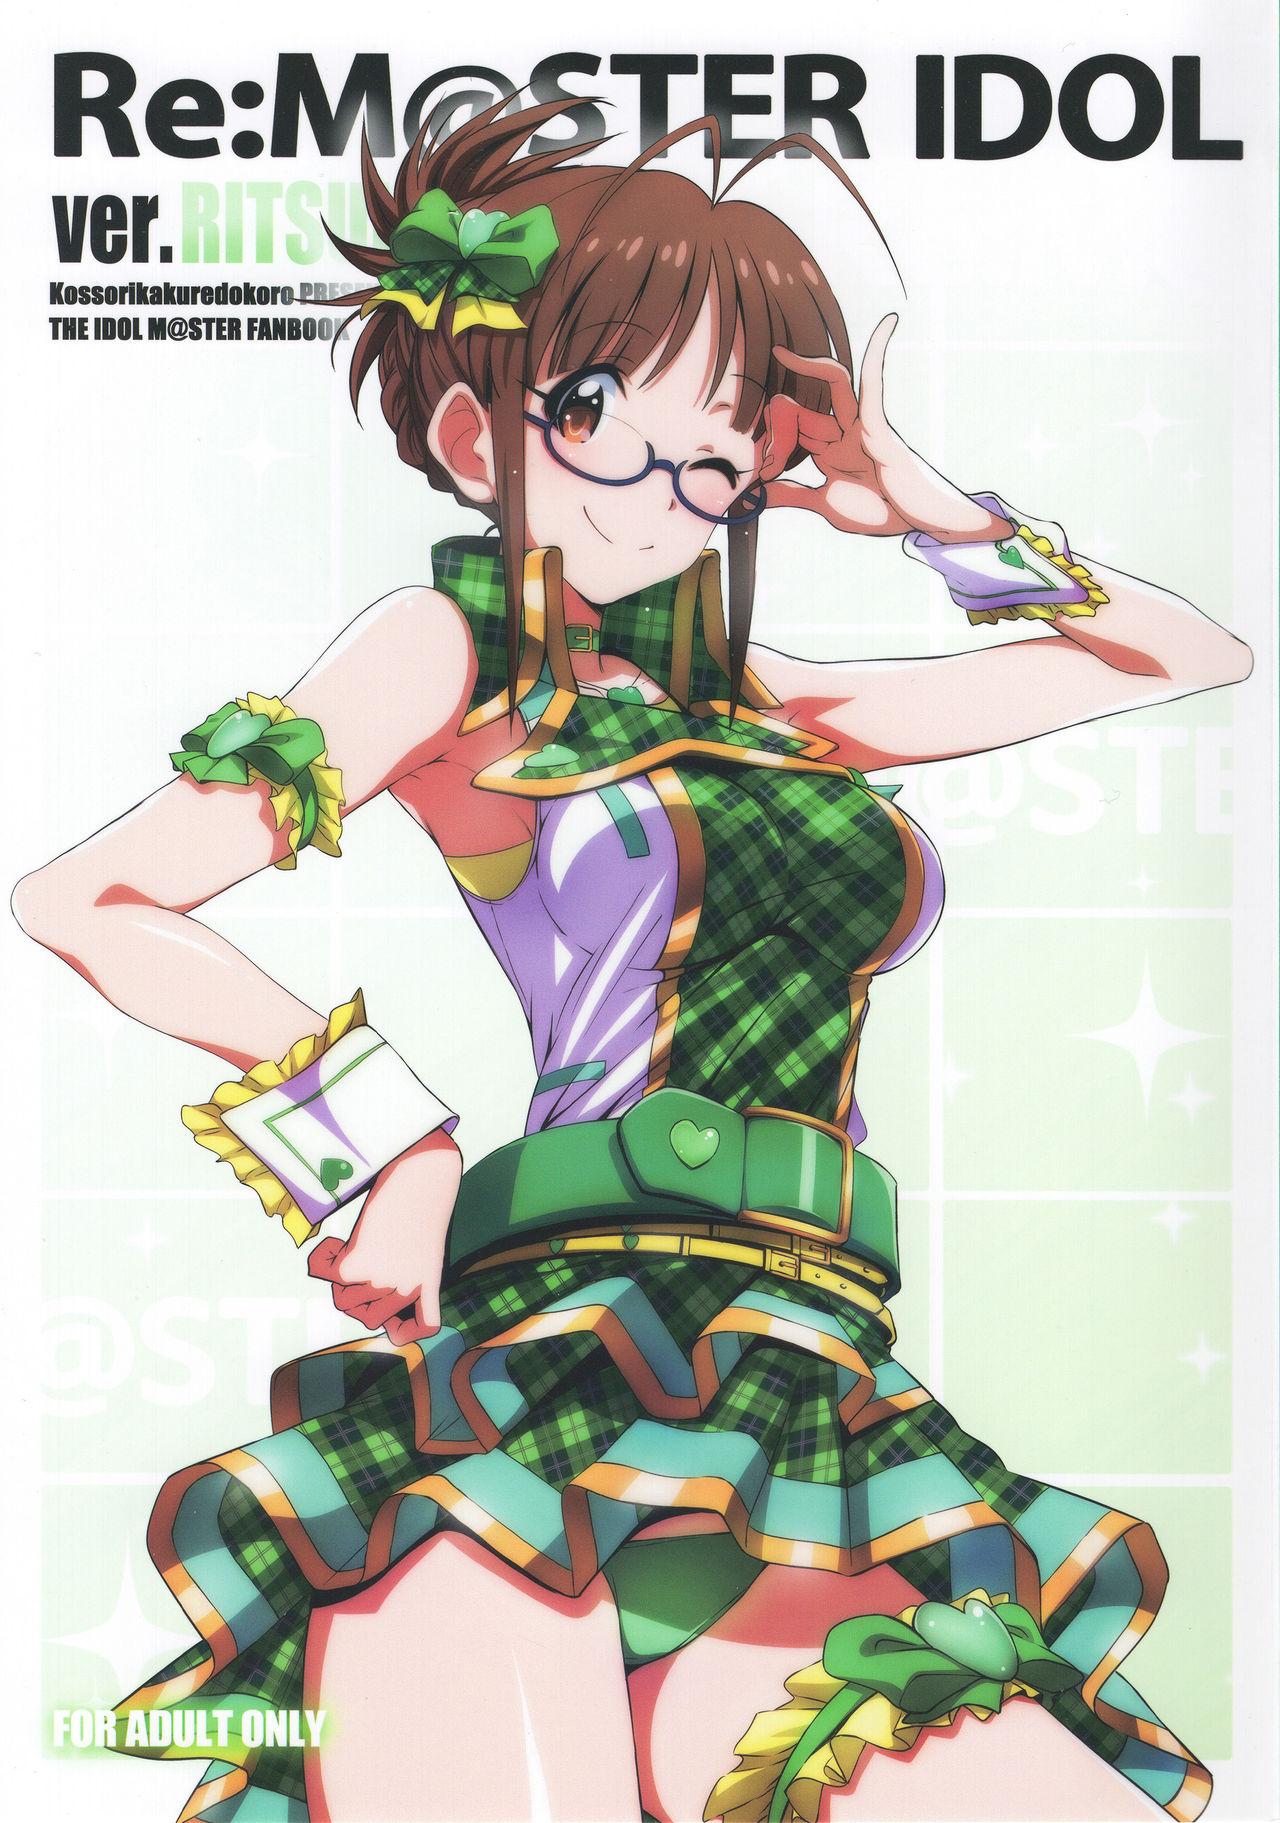 Belly Re:M@STER IDOL ver.RITSUKO - The idolmaster Tattooed - Picture 1